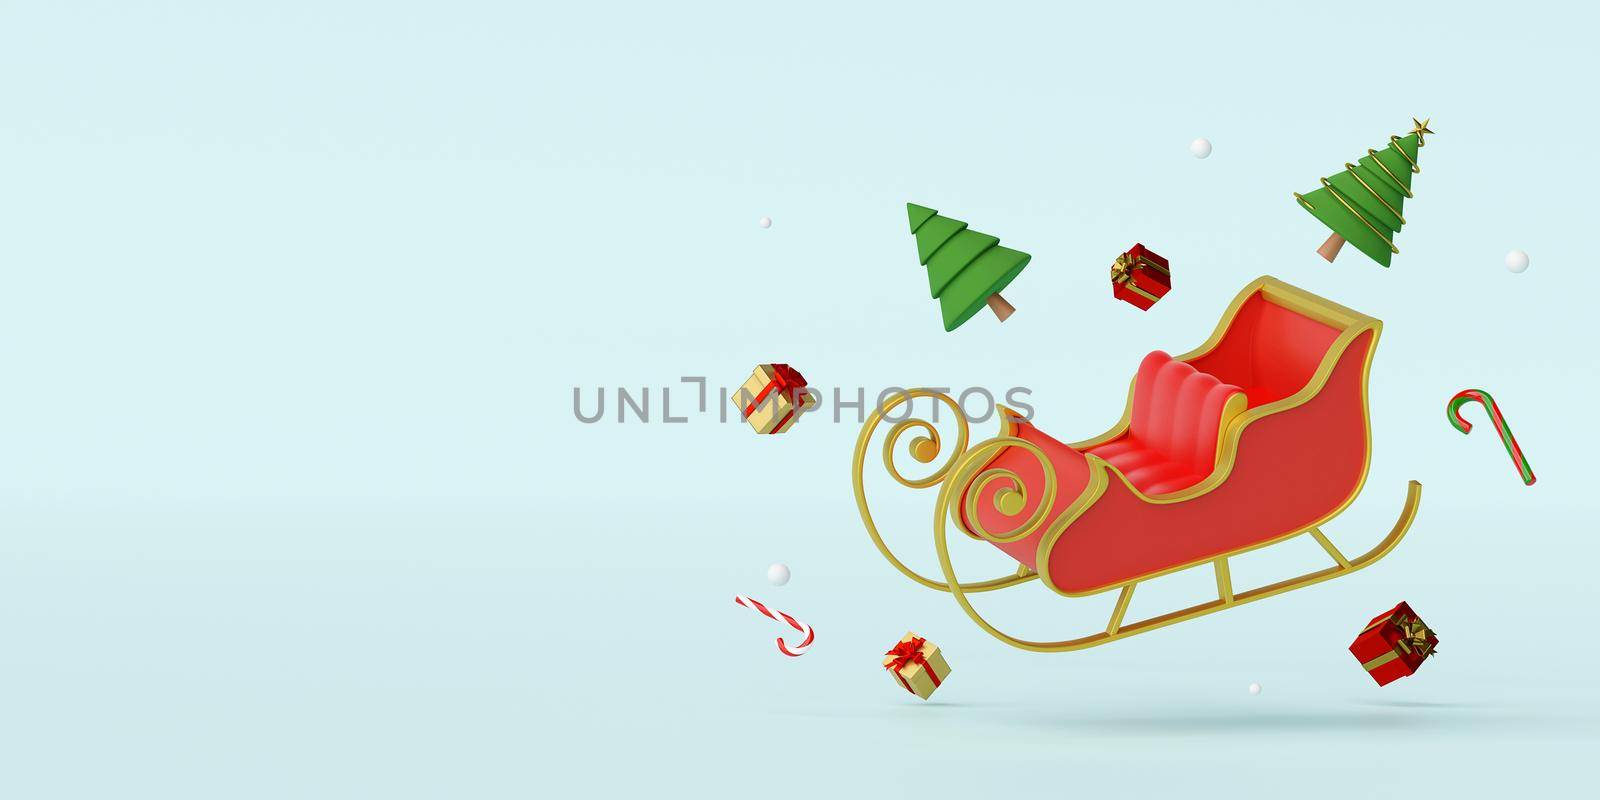 Merry Christmas and Happy New Year, Christmas sleigh with decoration, 3d rendering by nutzchotwarut